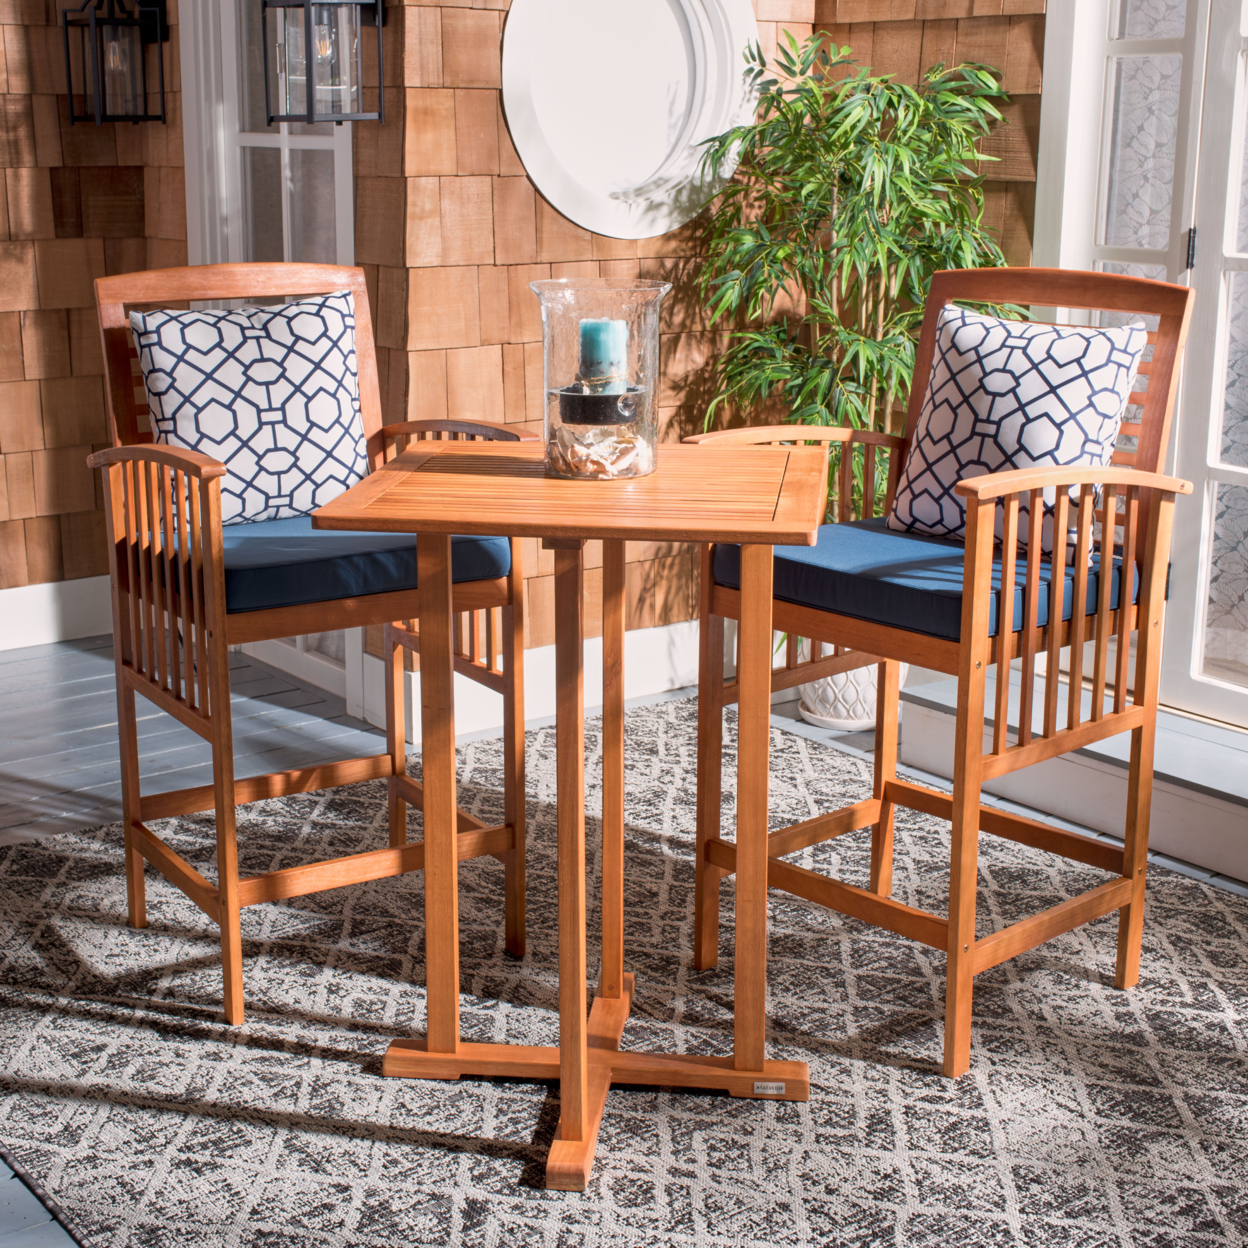 SAFAVIEH Outdoor Collection Pate 3-Piece Bar Table Bistro Set Natural/Navy/Navy